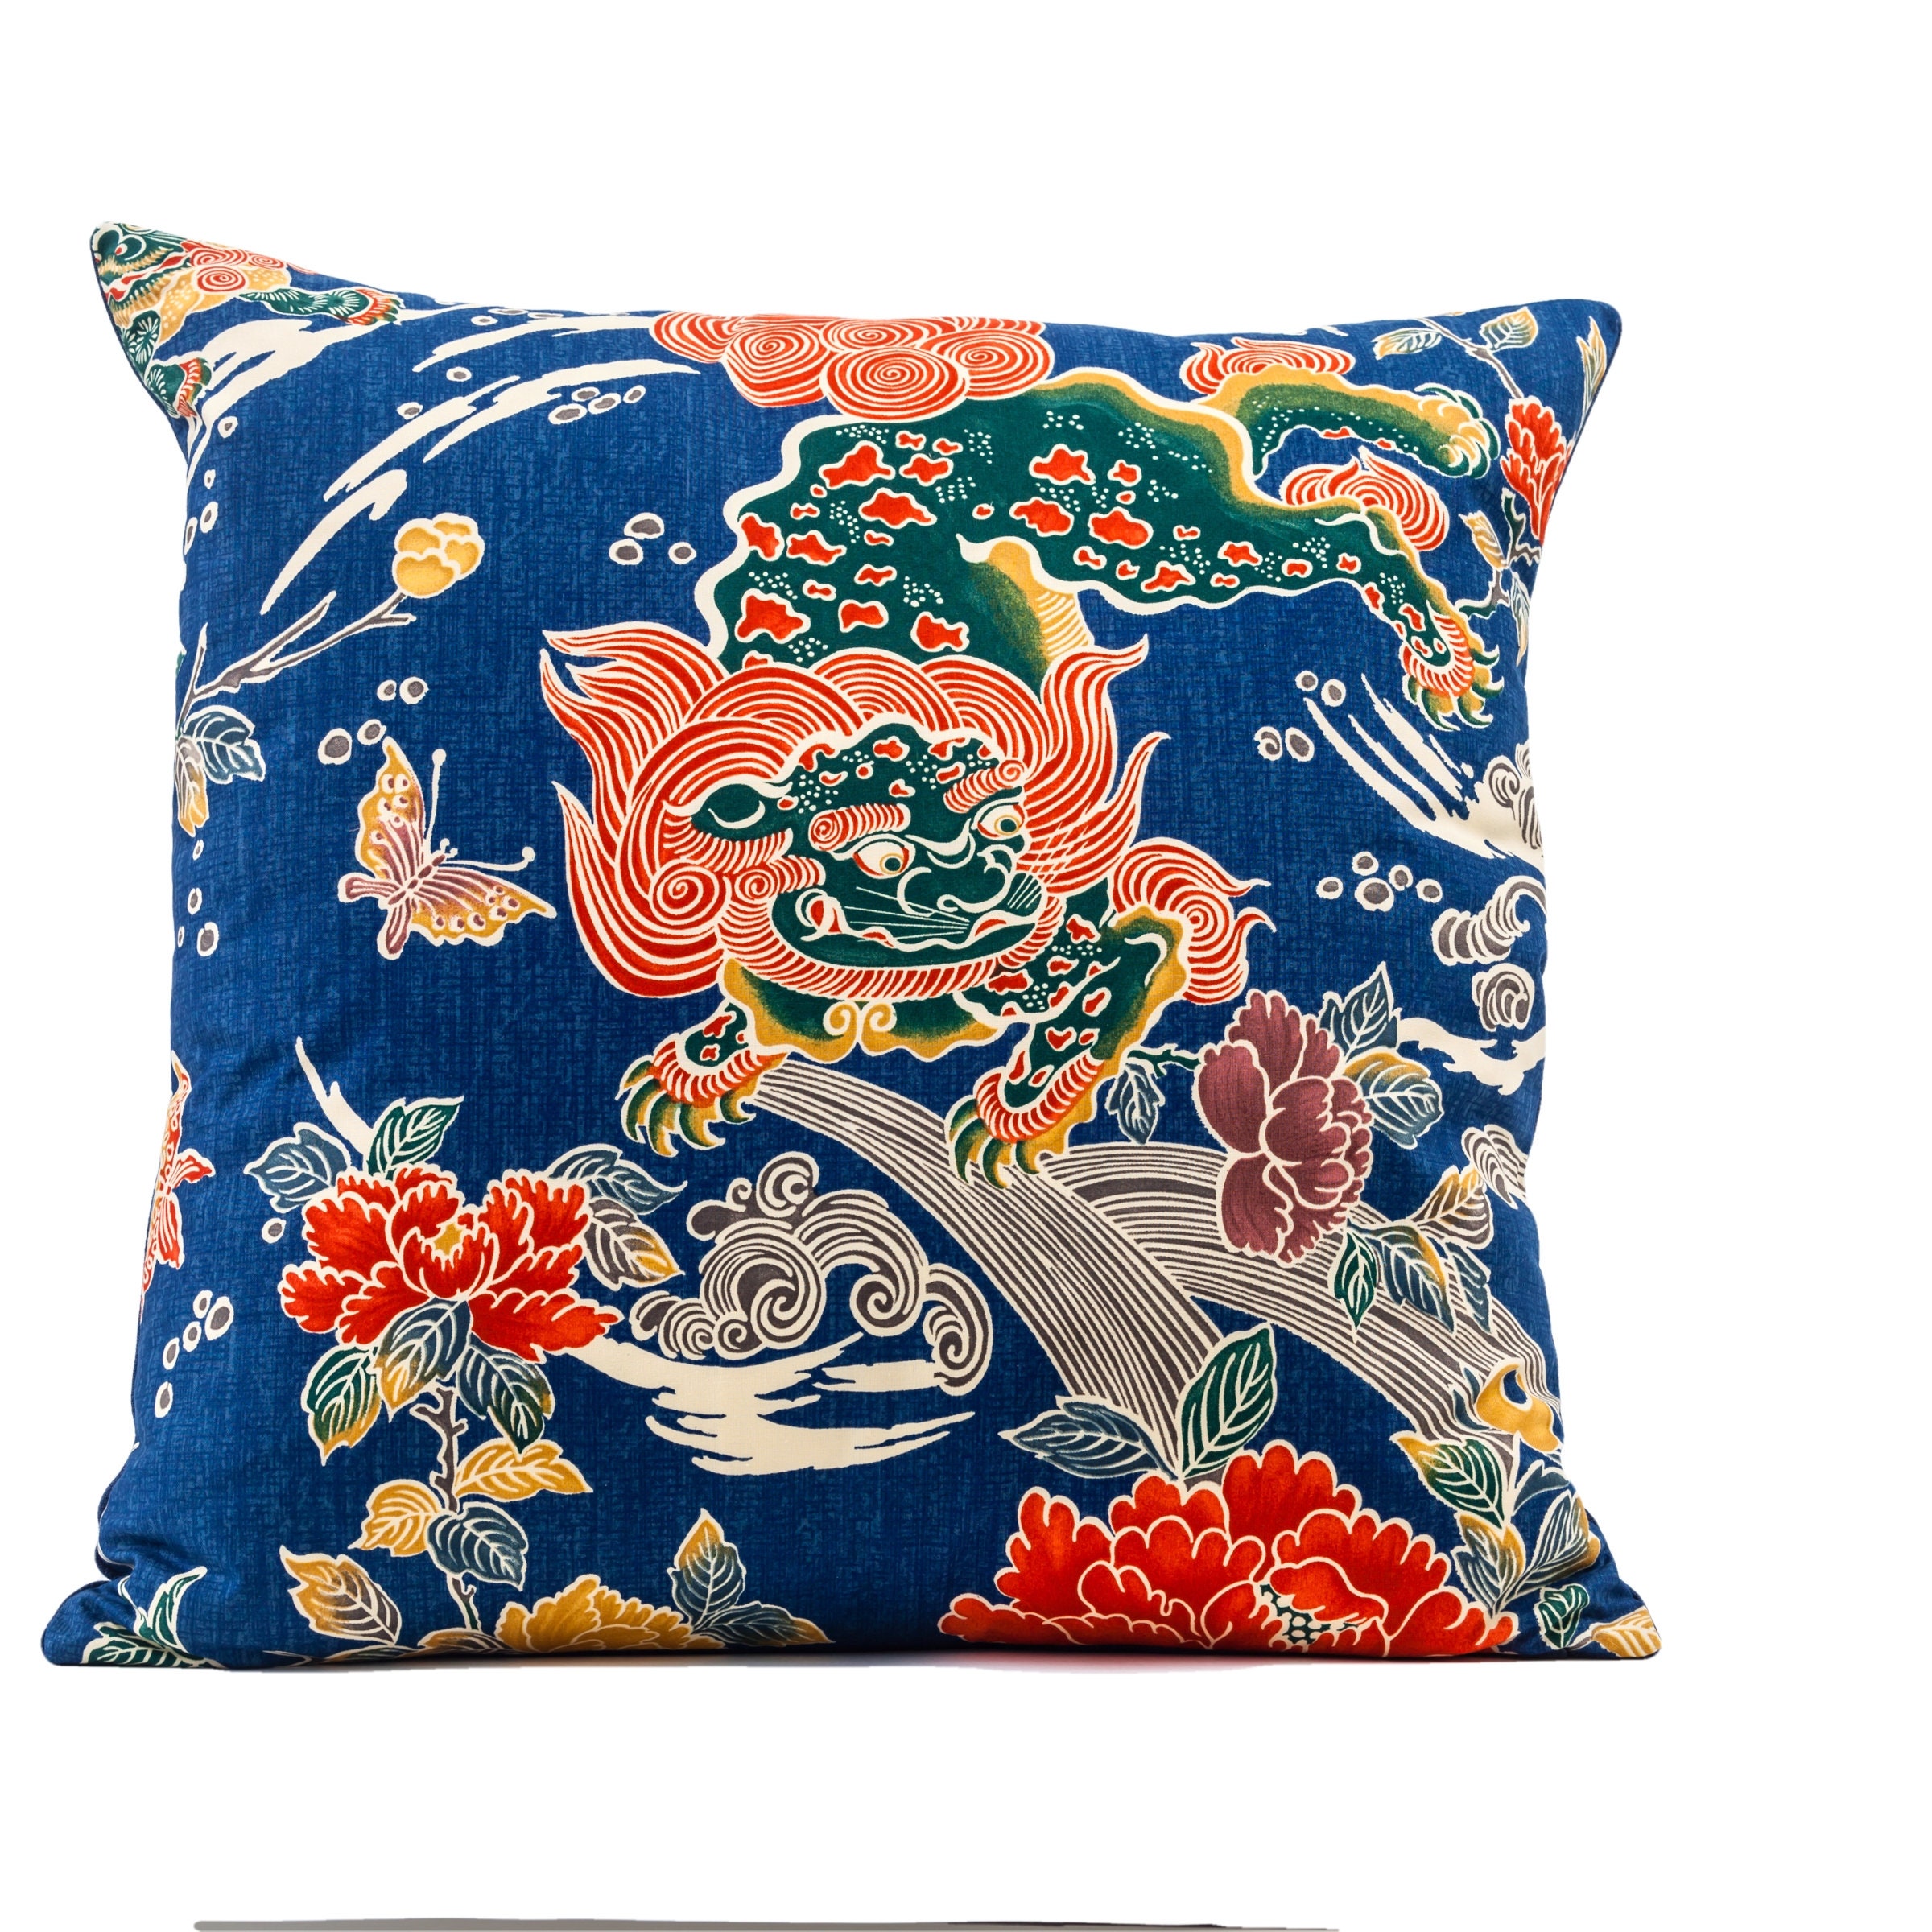 Shishi chinoiserie pillow cover Brunschwig & Fils fabric | Etsy